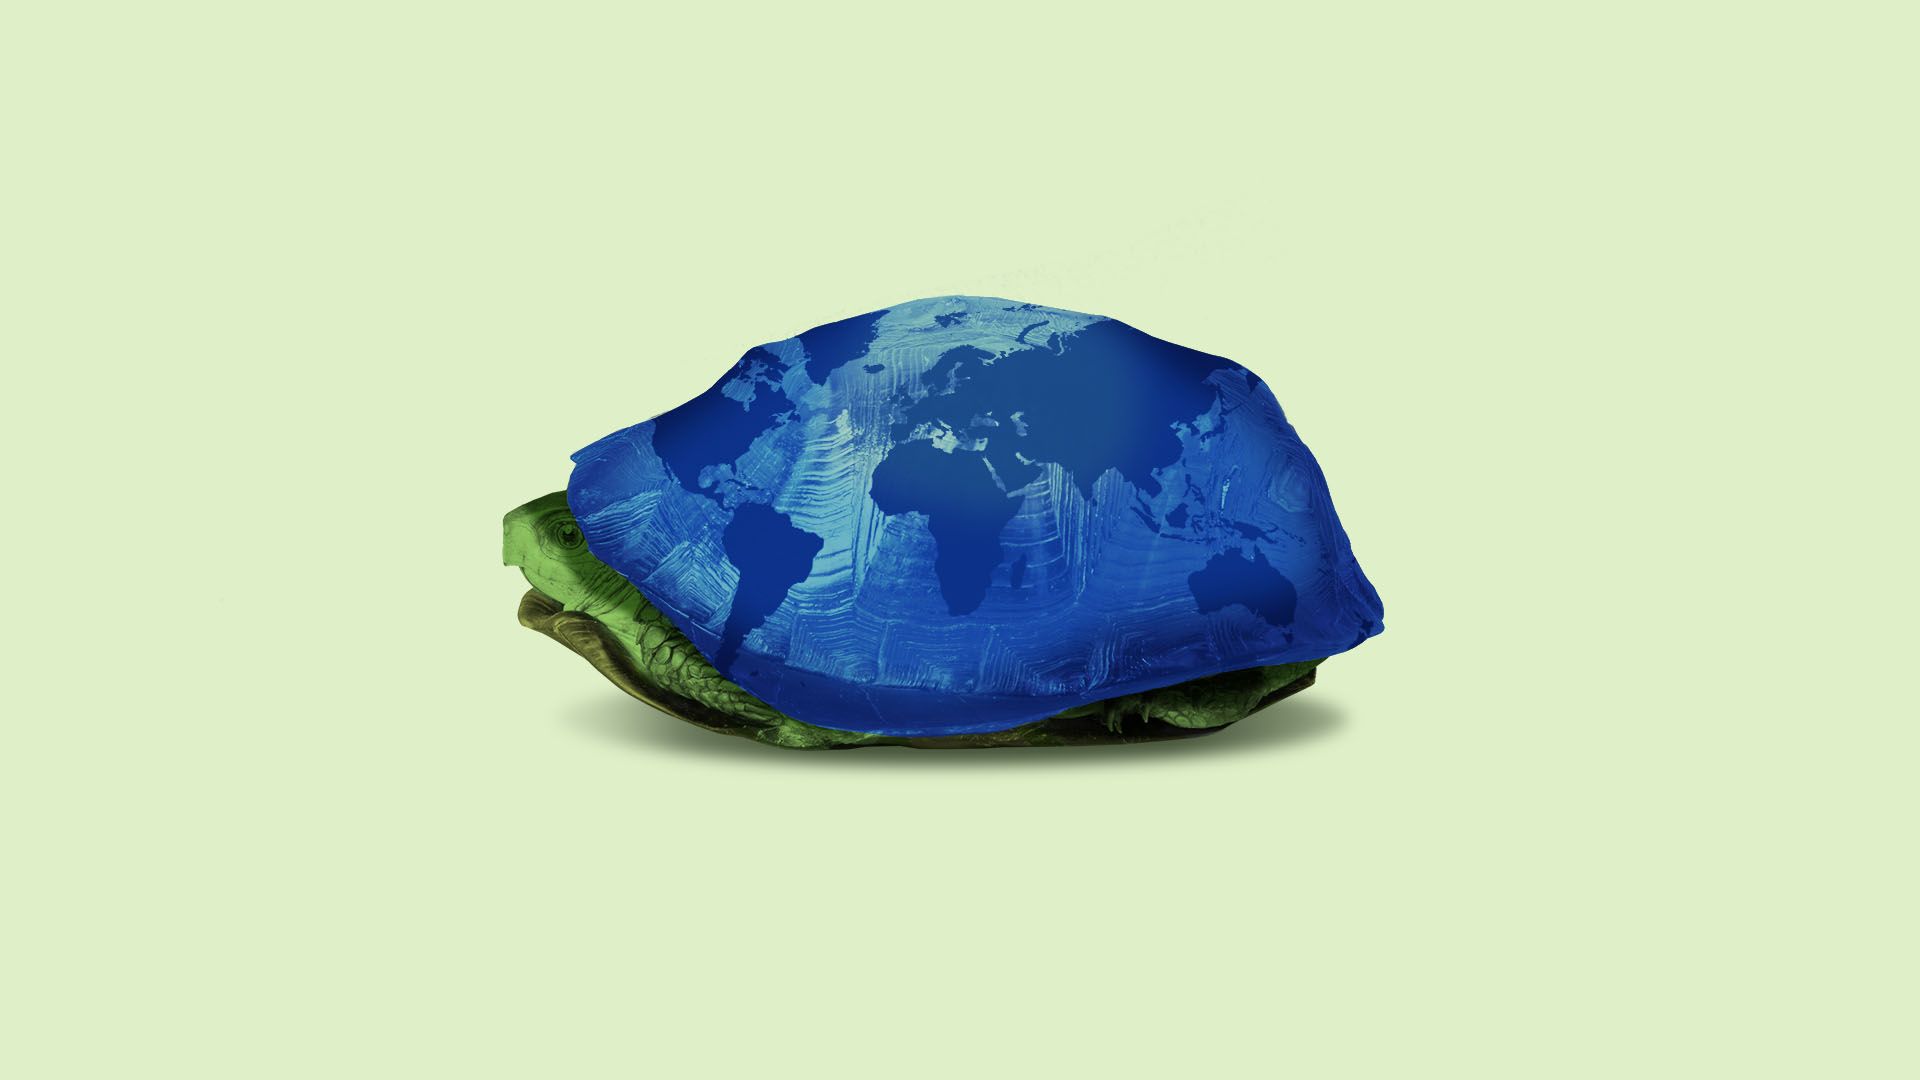 Illustration of a turtle with a globe design hiding in it's shell